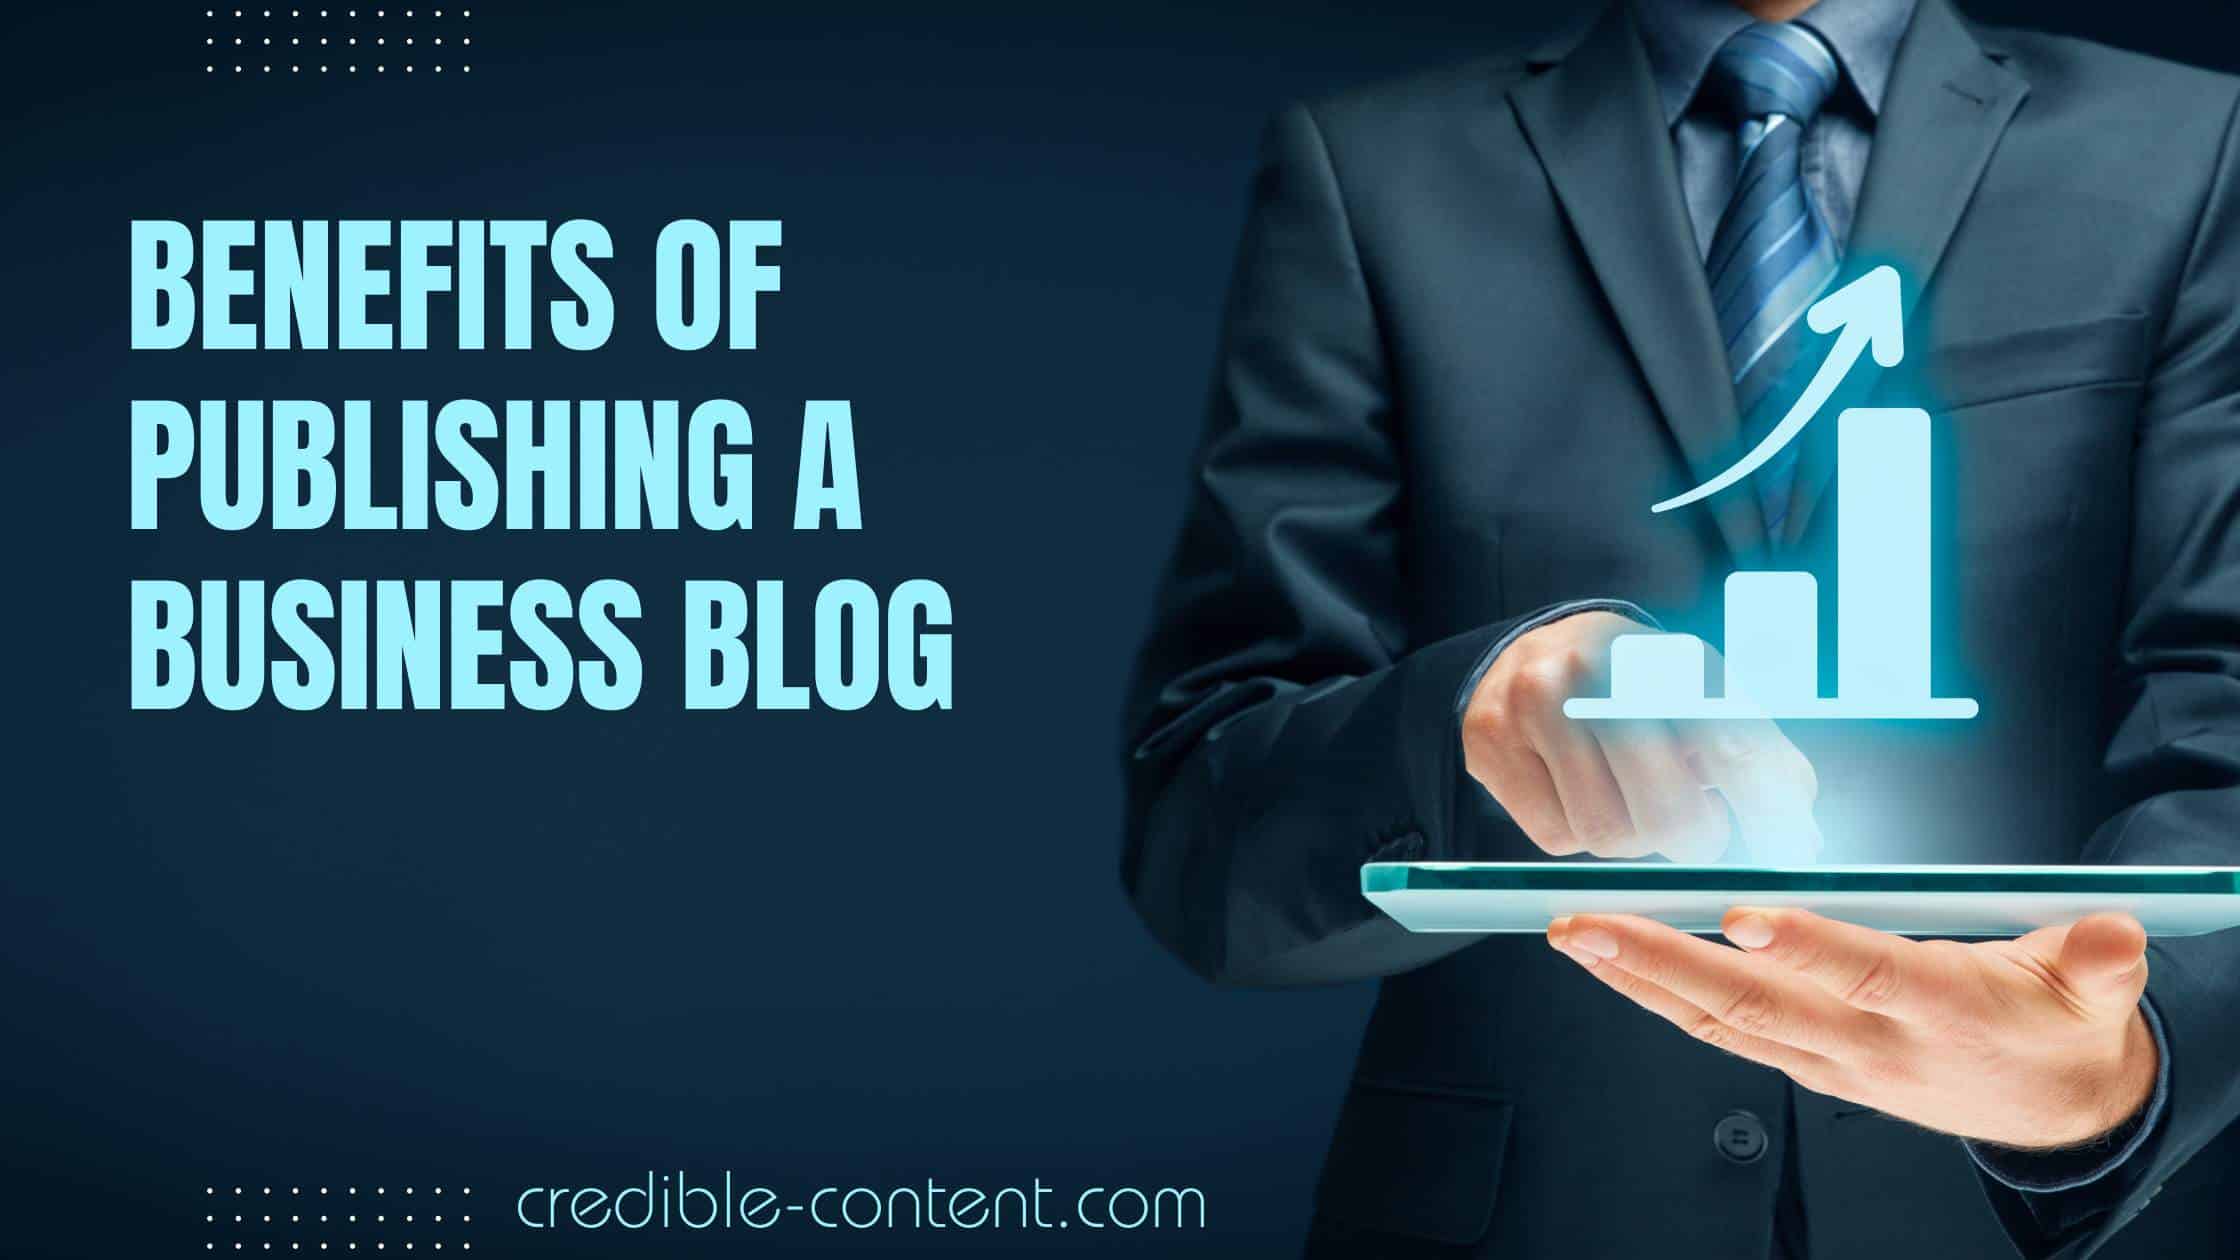 Benefits of publishing a business blog